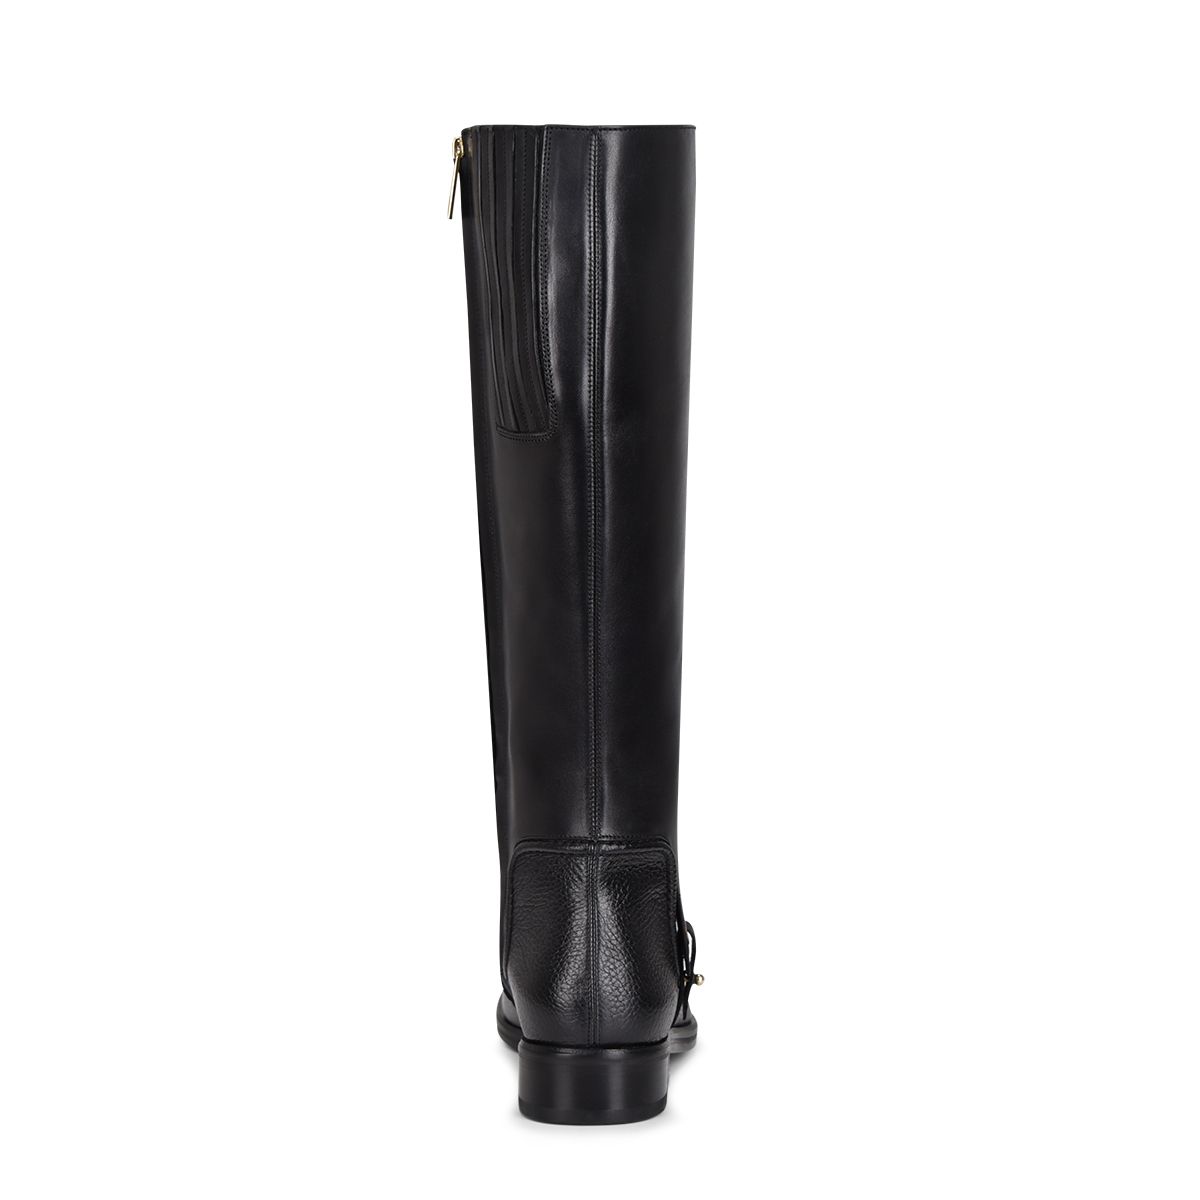 45TVNTS - Franco Cuadra black casual riding deer leather boots for women-Kuet.us